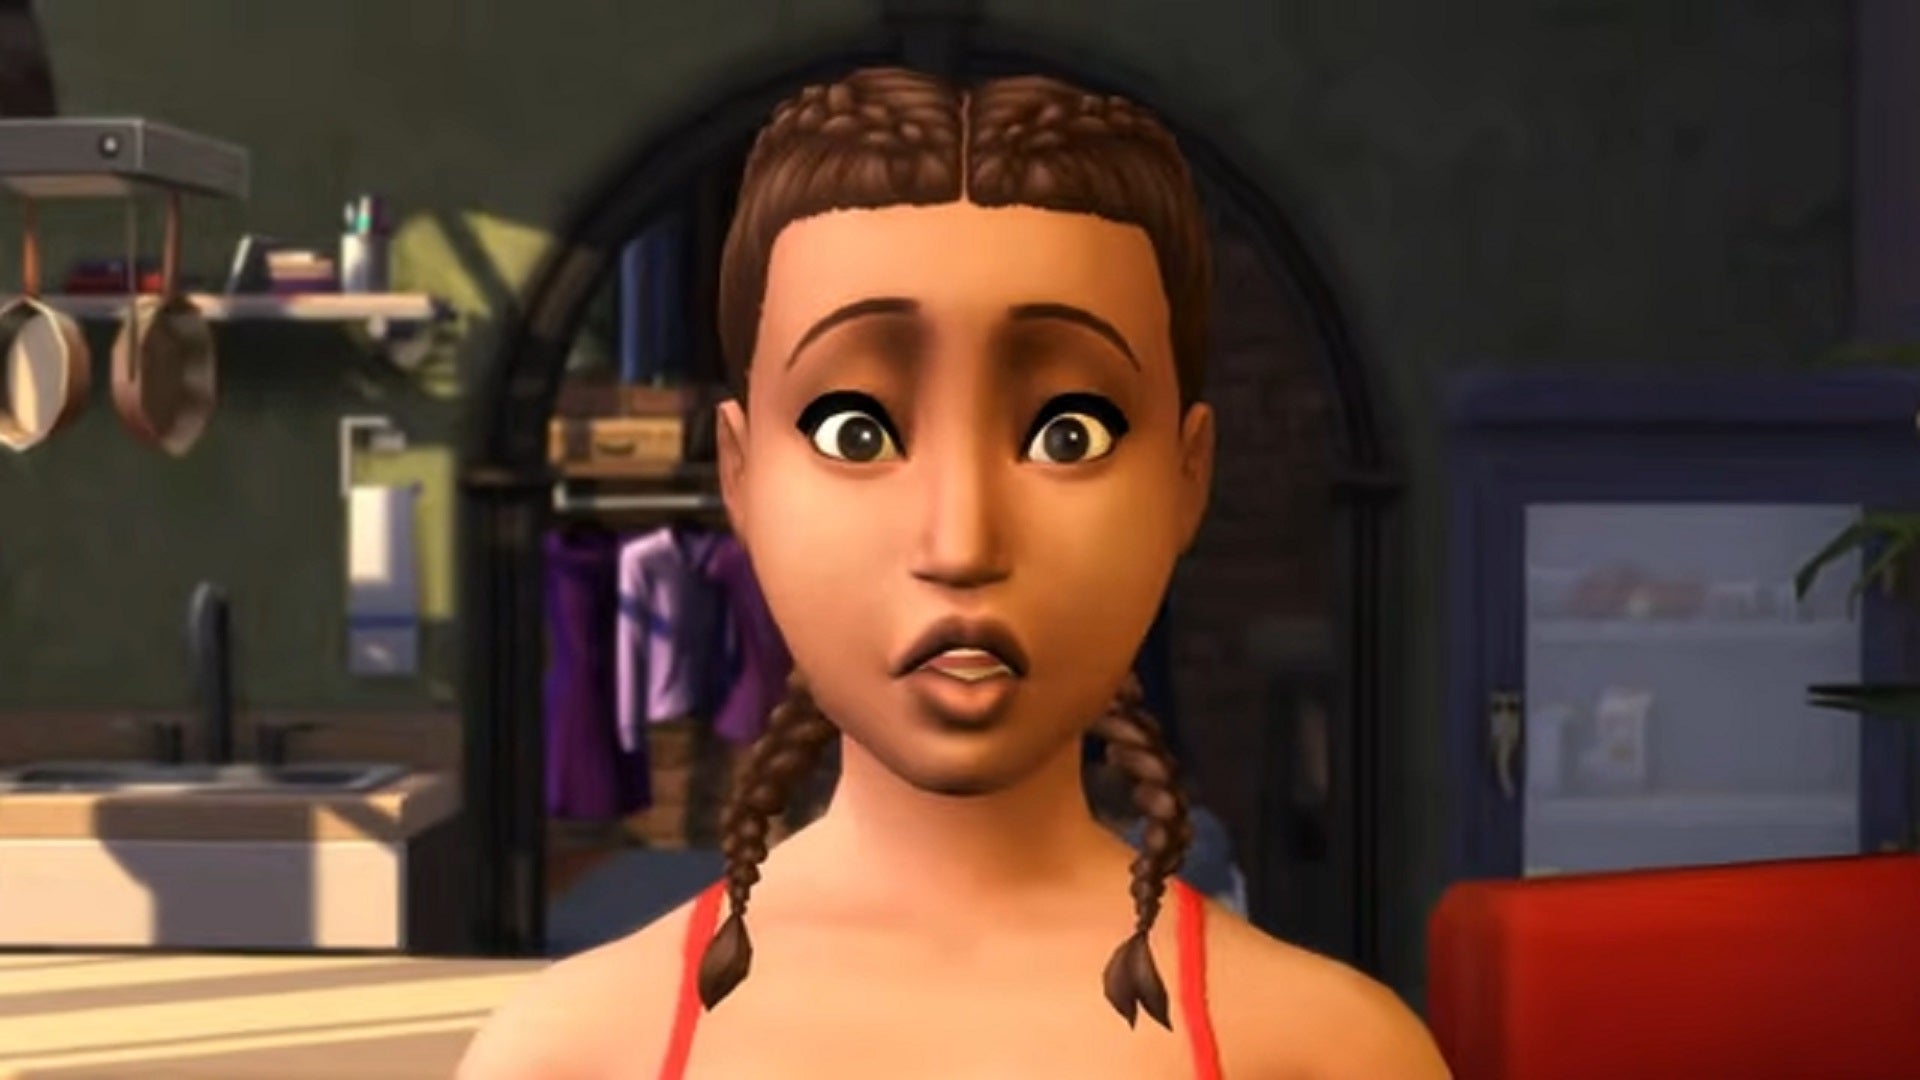 In a trailer still for The Sims 4 StrangerVille, a Sim reacts with shock to something she has witnessed off-screen.